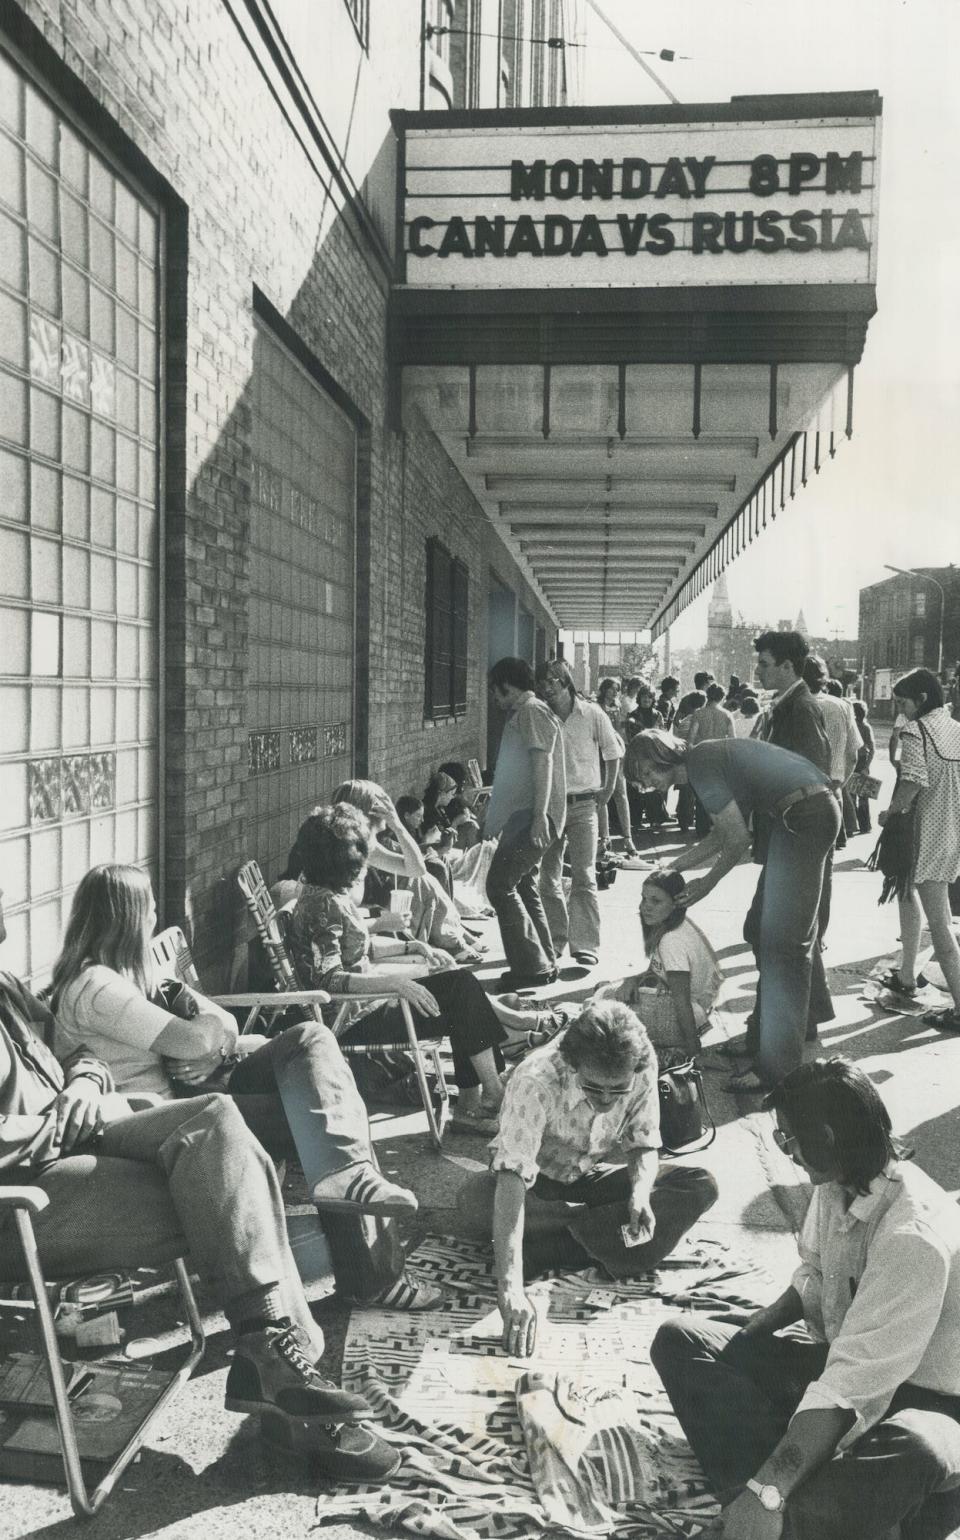 Hockey fans wait in line on August 31, 1972 to buy tickets for a Team Canada game.